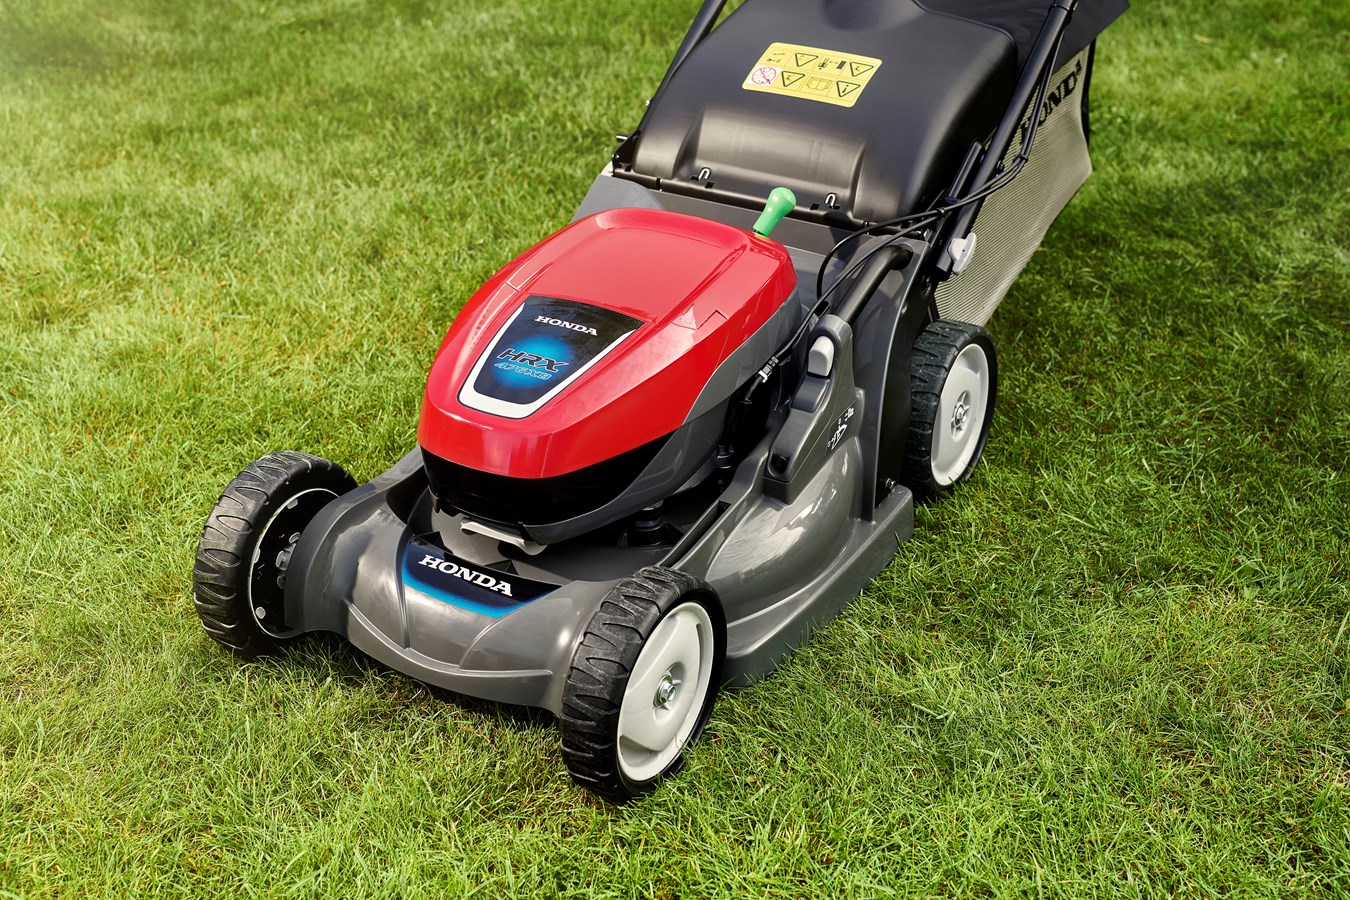 Honda has added a new cordless, selfpropelled mower to its premium HRX